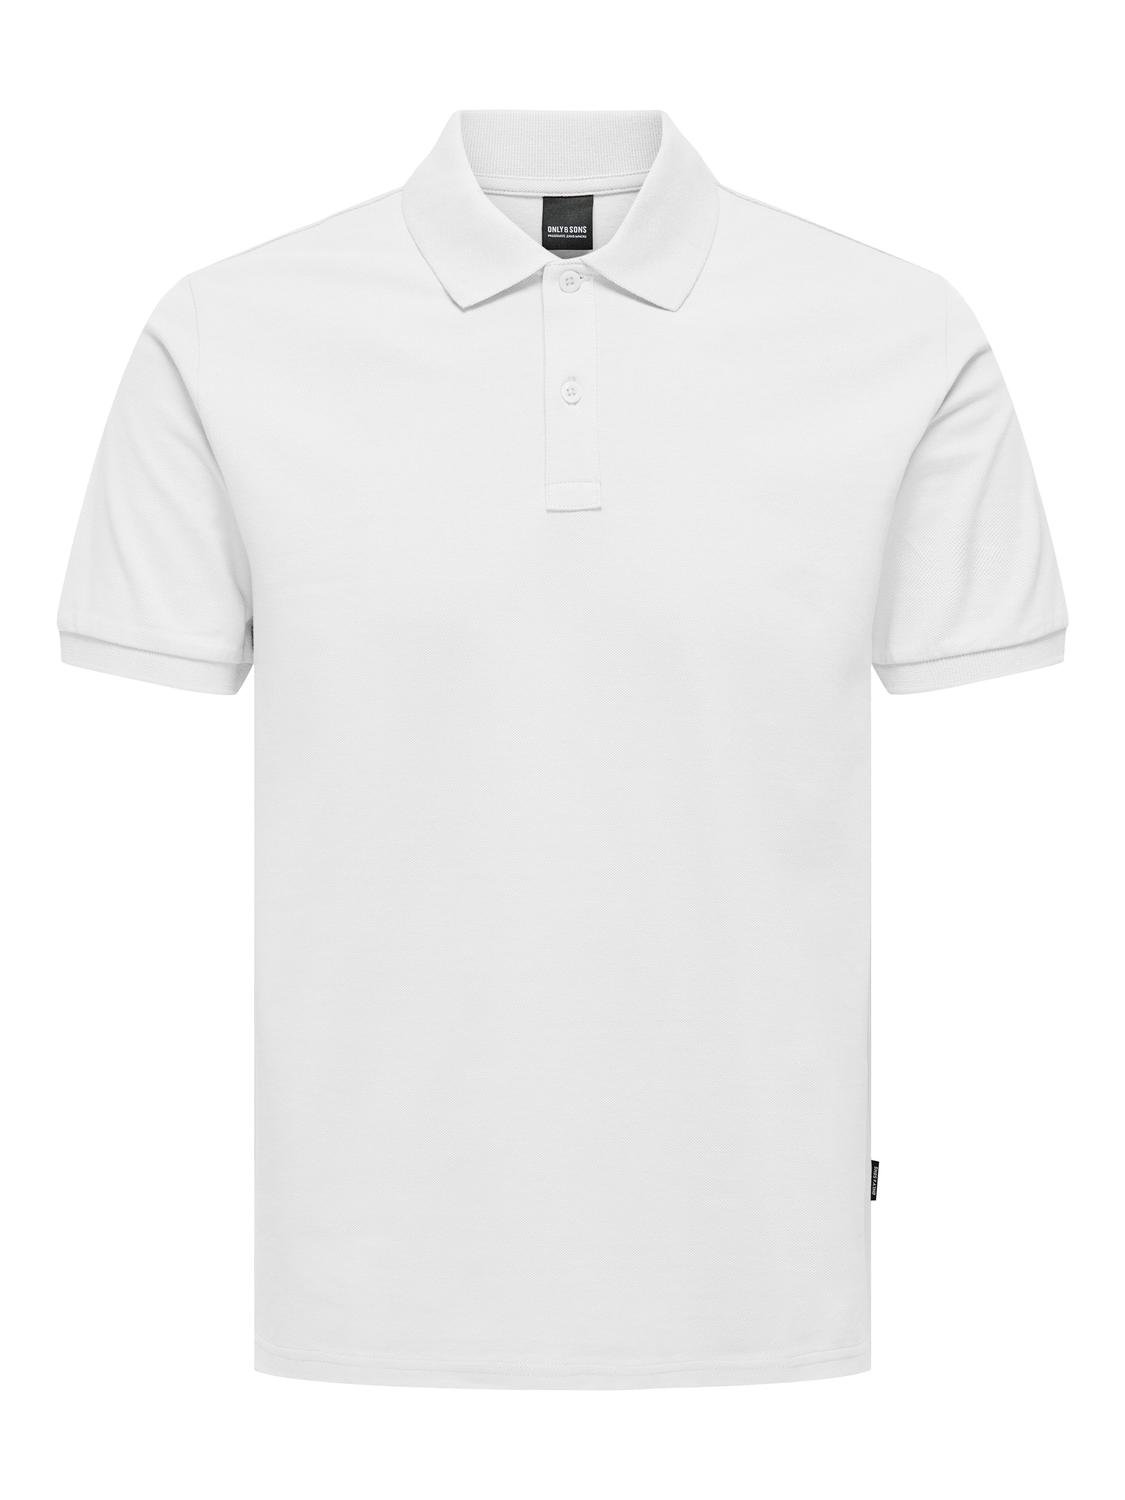 ONLY & SONS o-hals polo  -White - 22029044